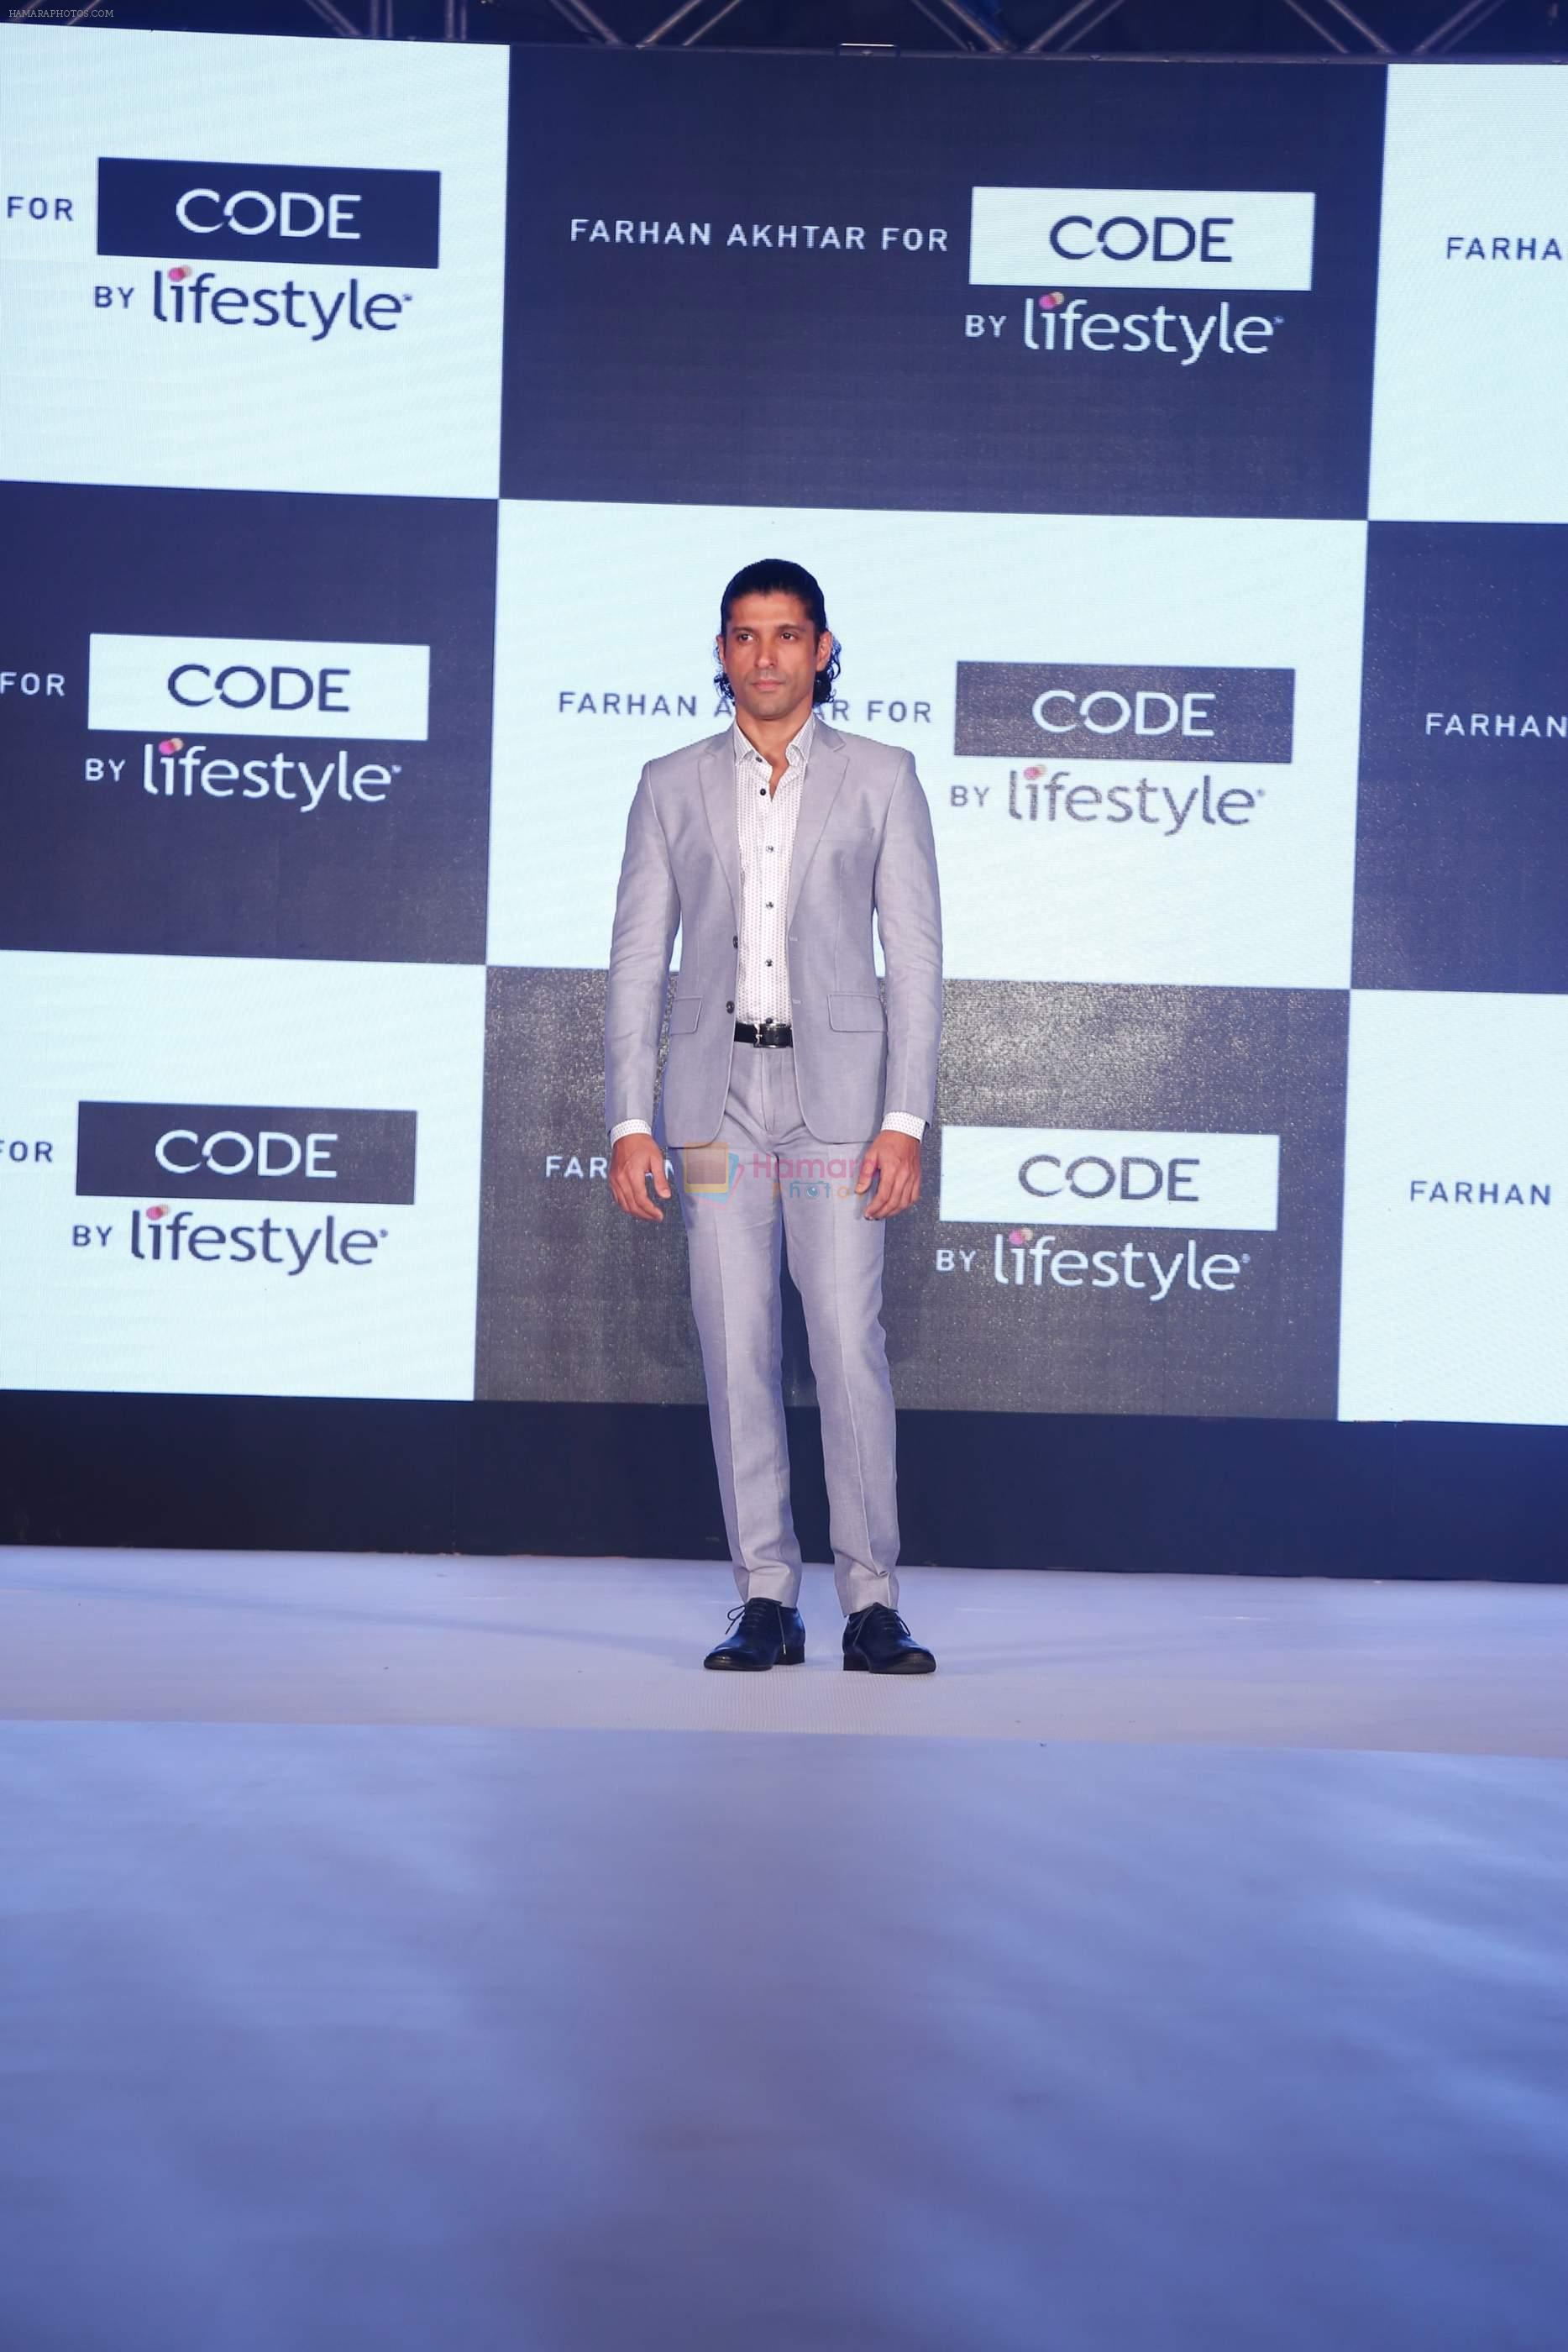 Farhan Akhtar for CODE by Lifestyle on 30th March 2016